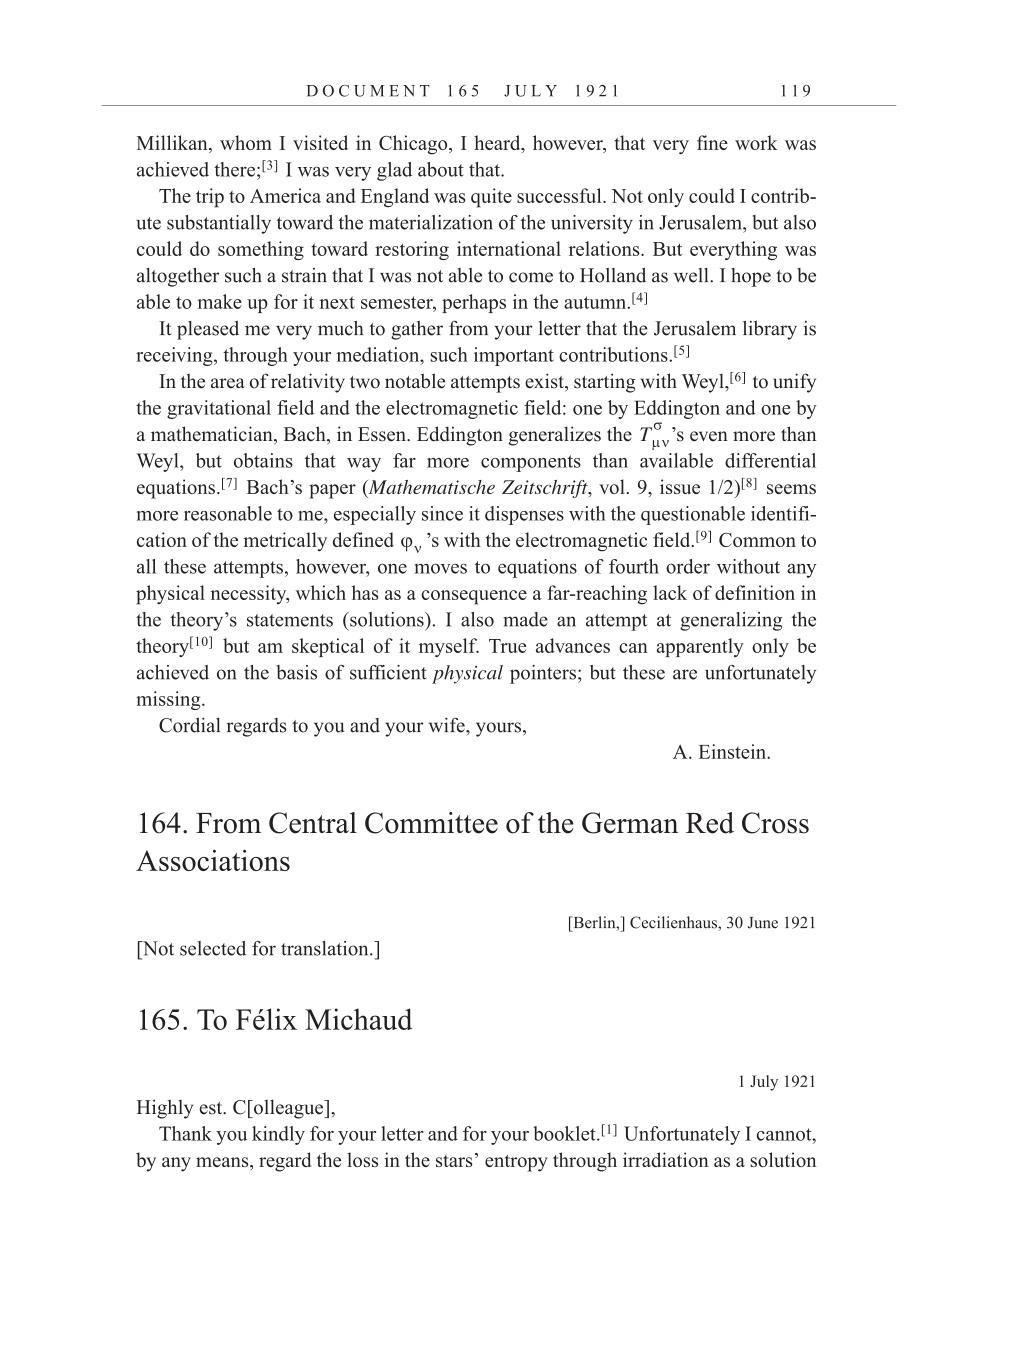 Volume 12: The Berlin Years: Correspondence, January-December 1921 (English translation supplement) page 119